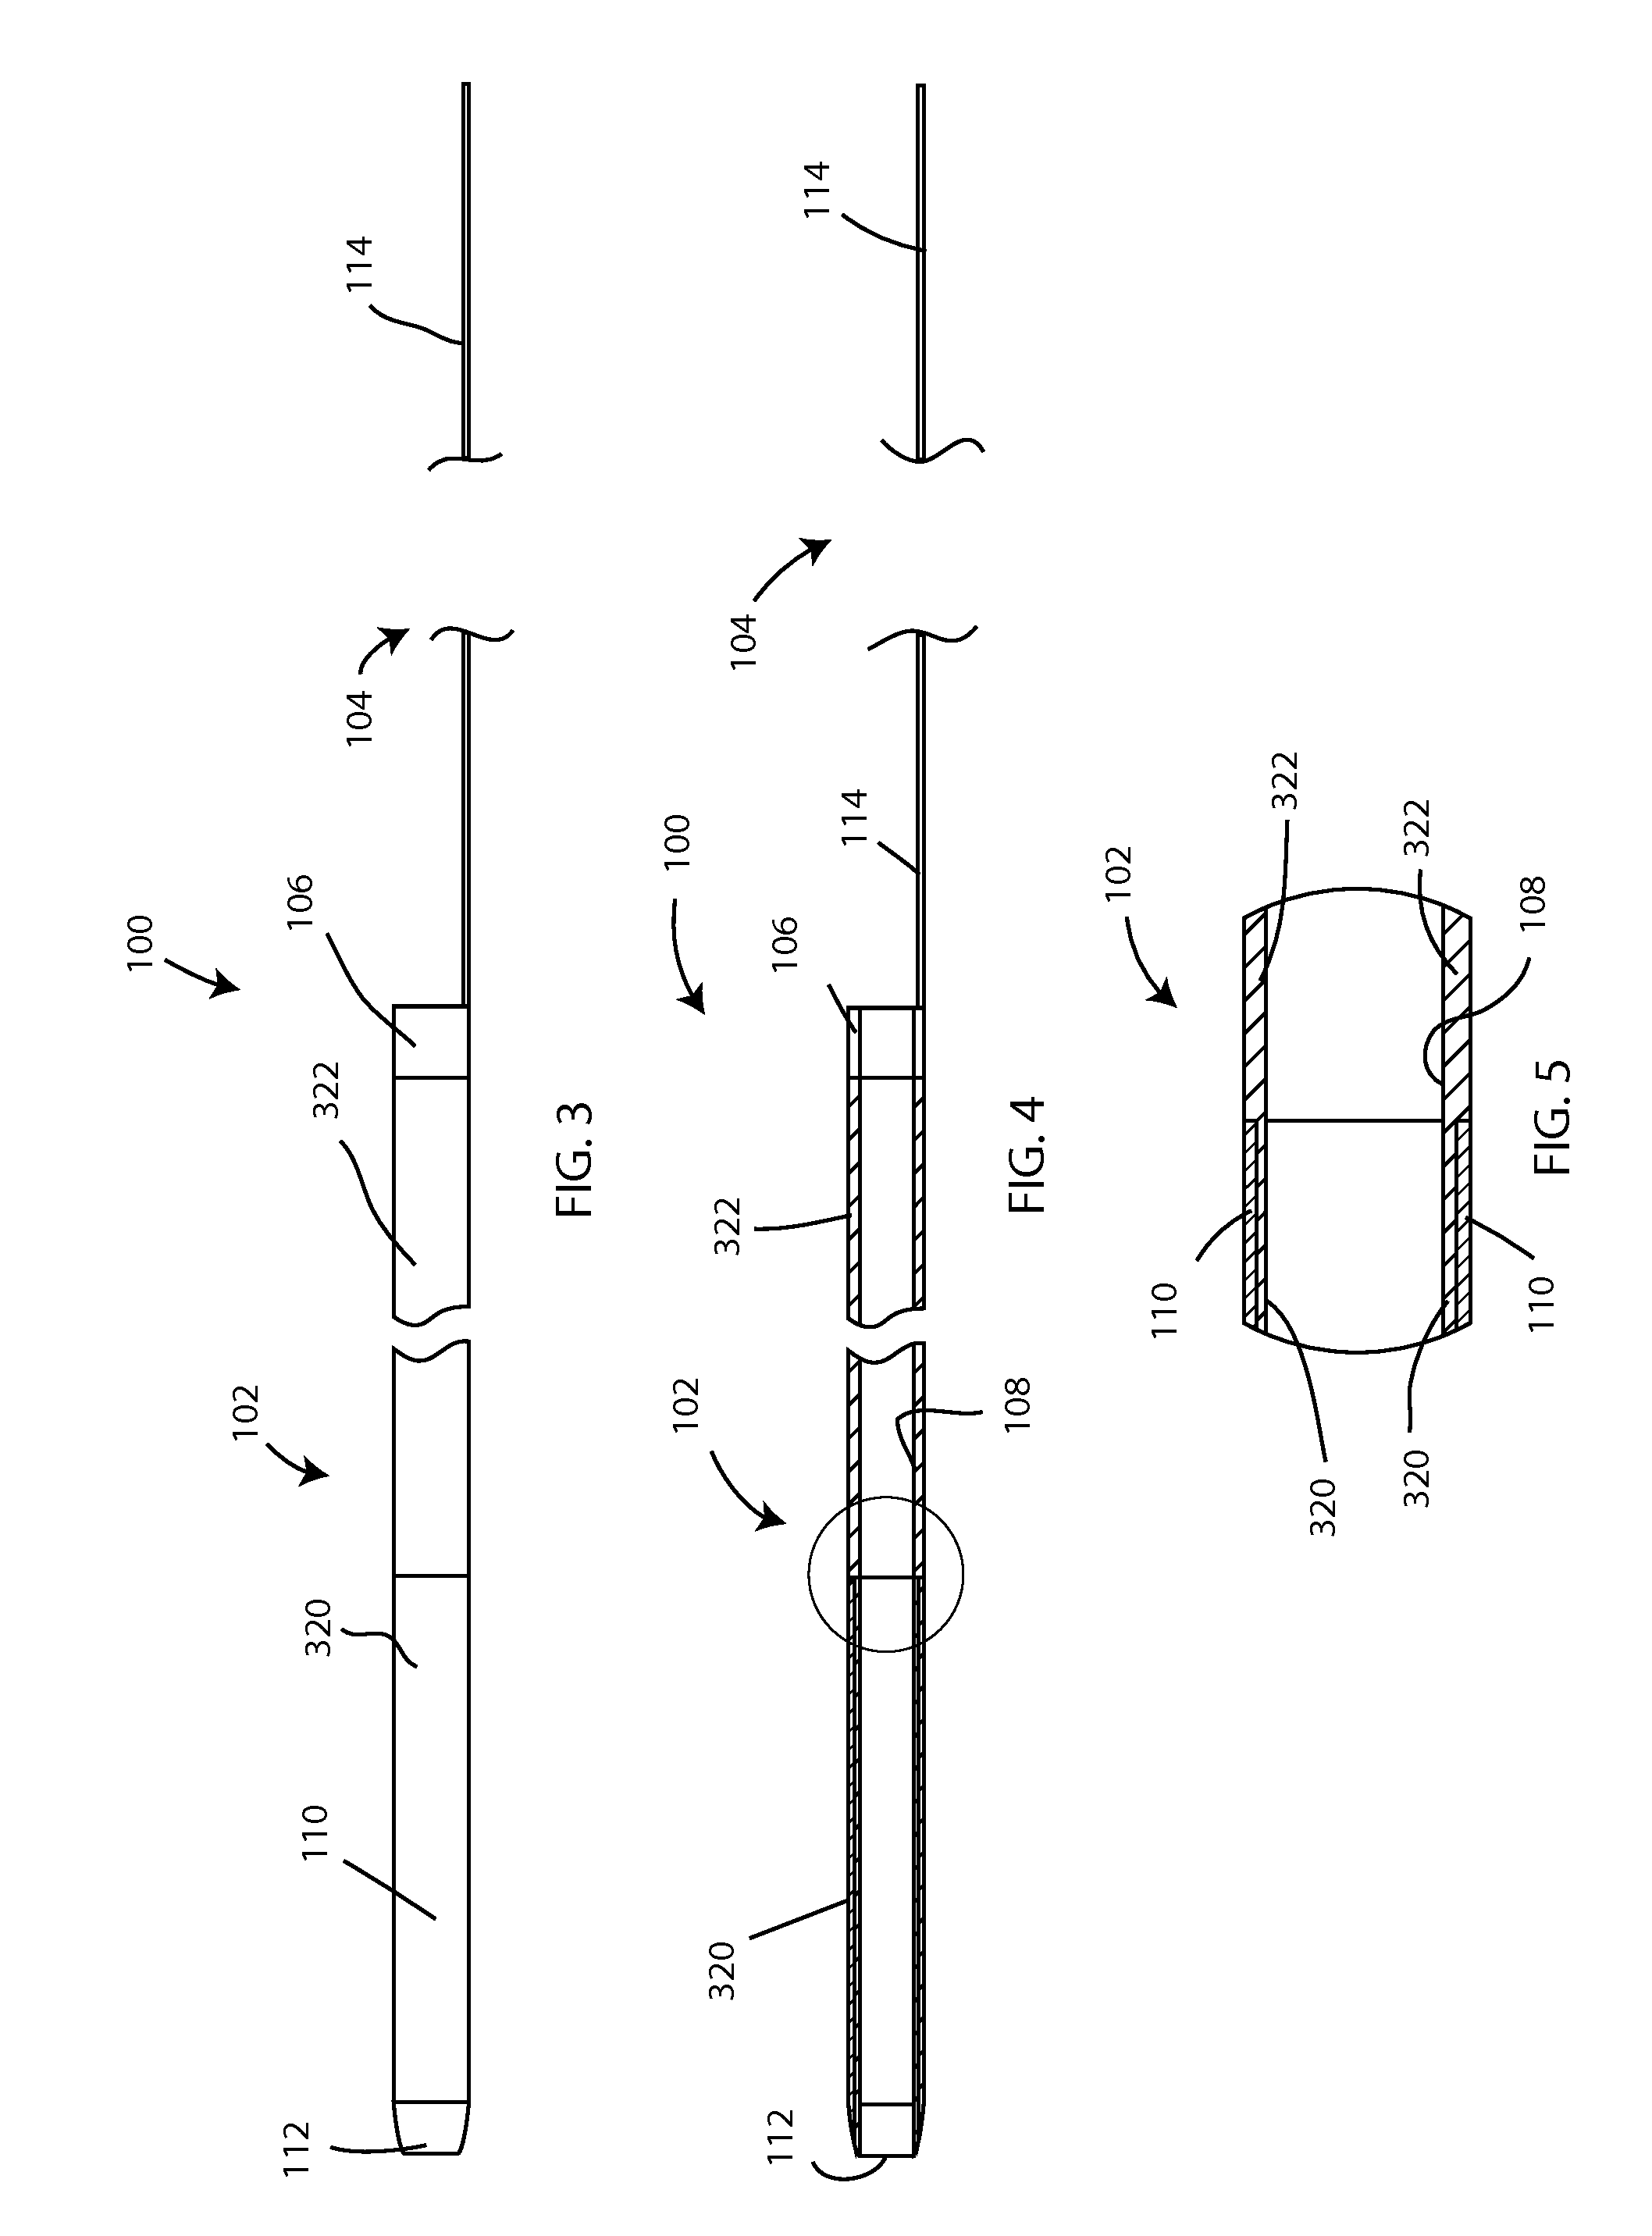 Coaxial guide coil for interventional cardiology procedures